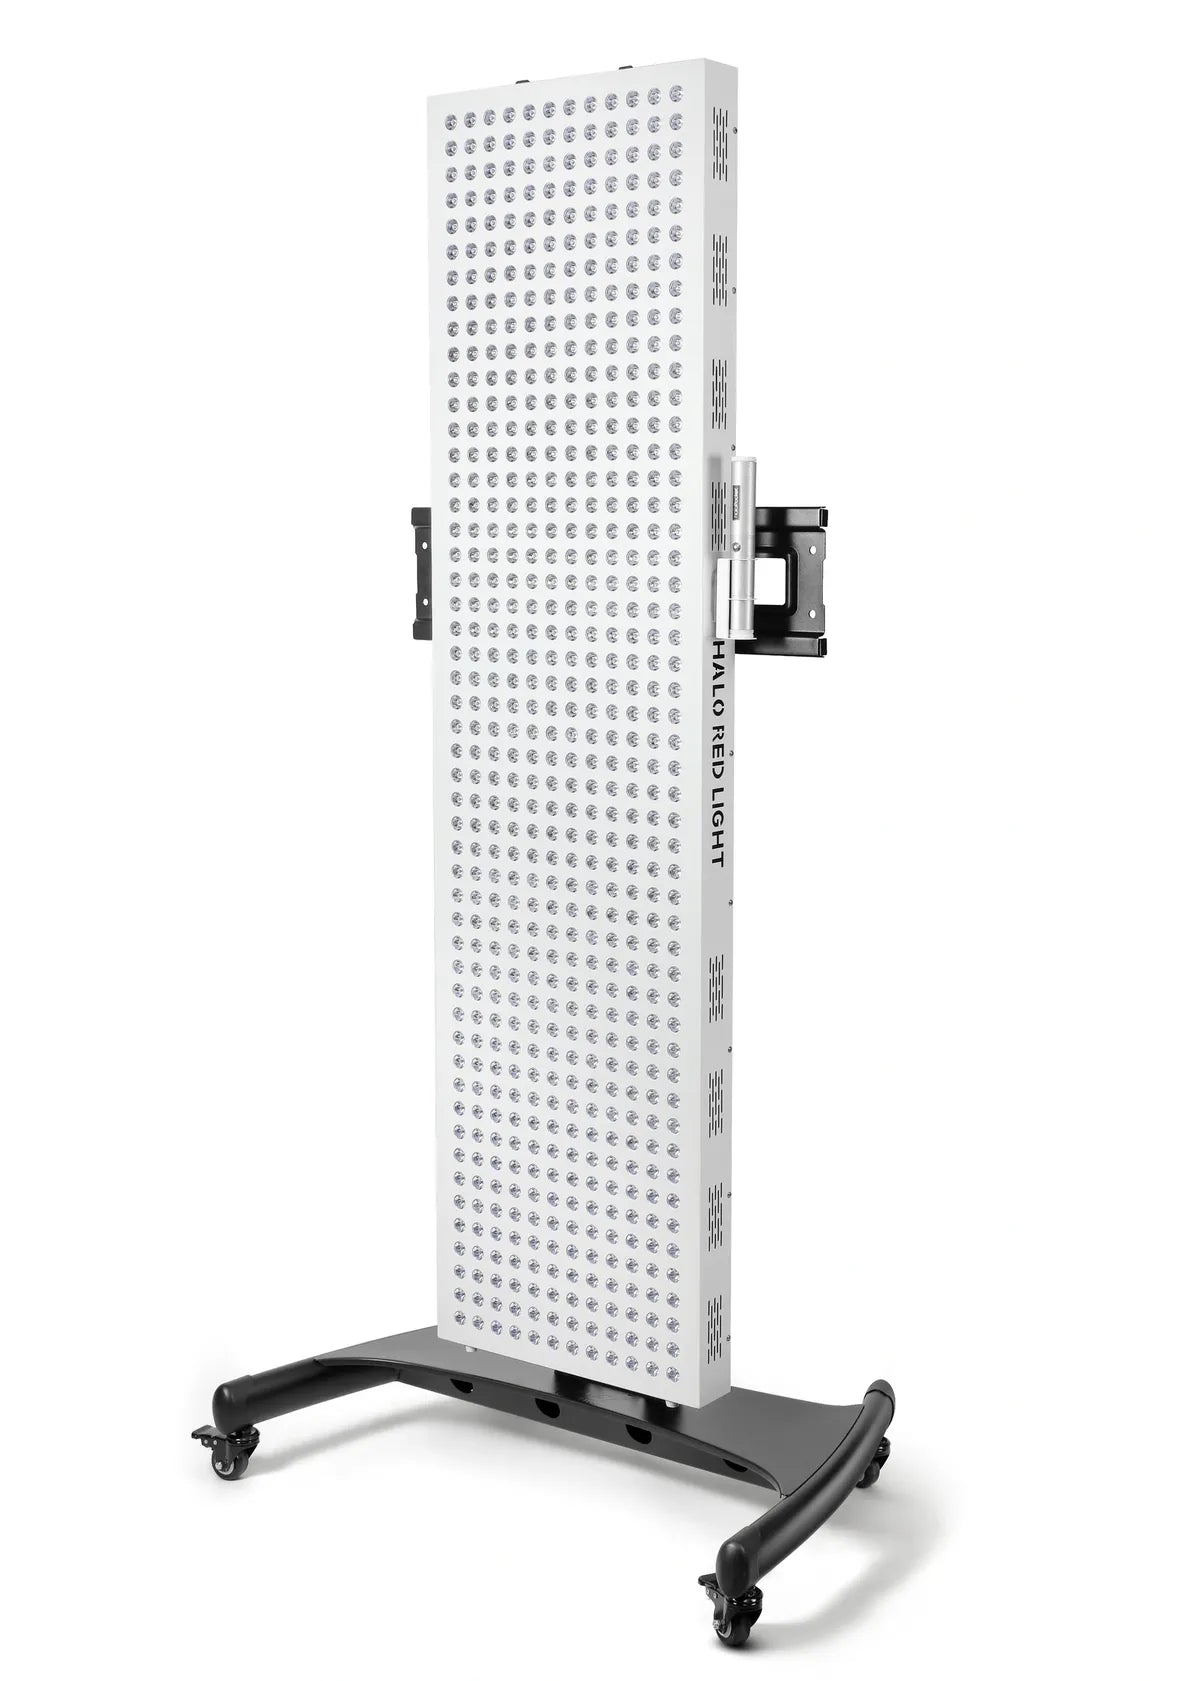 HaloRed Light Pro Max on a black vertical stand